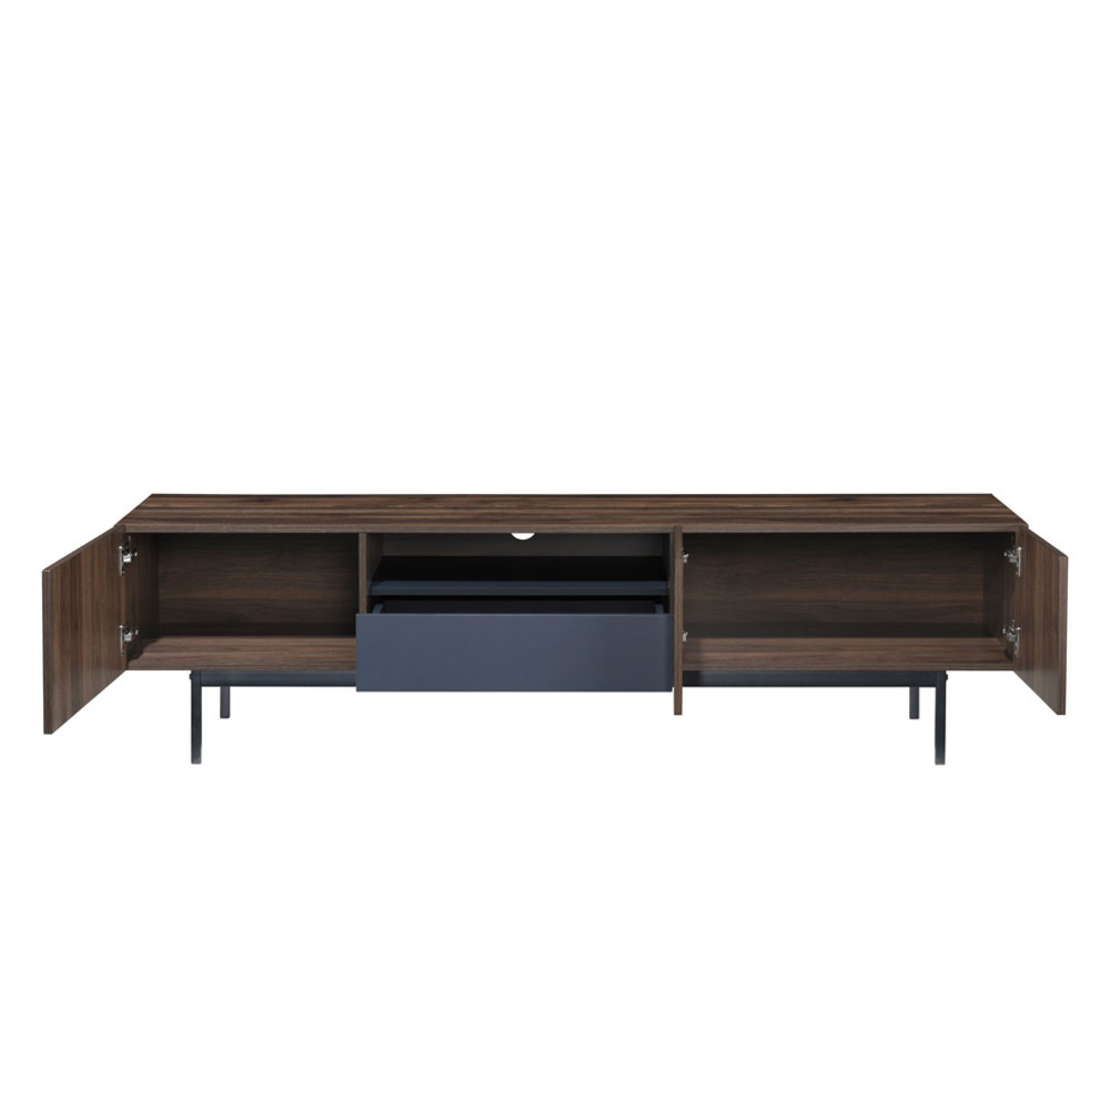 GROOVES TV STAND 2DOORS 2DRAWERS CHIPBOARD WITH MELAMINE CARTA WOTAN OAK GREY METAL 180x41,5xH50cm MY